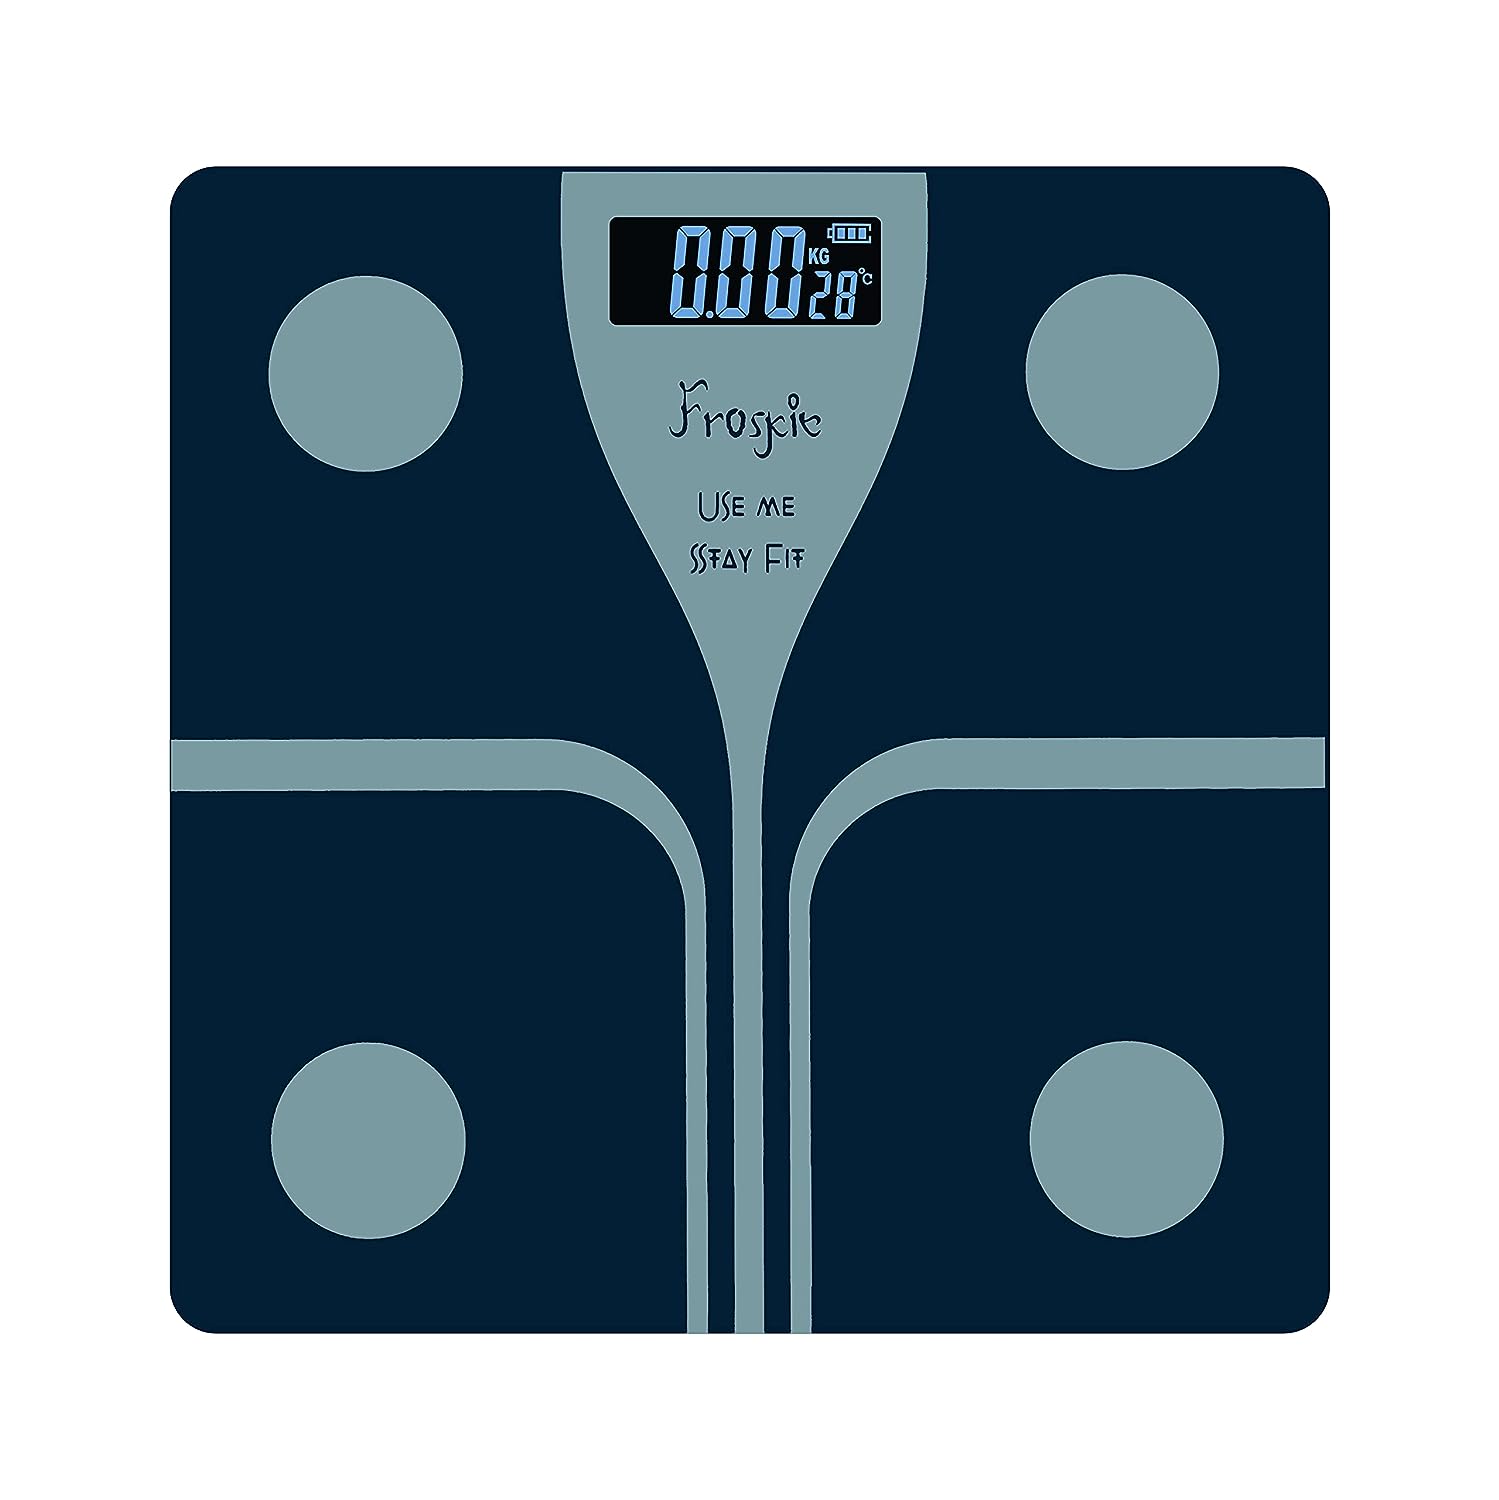 Froskie (India) Electronic Digital Personal Bathroom Health Body Weighing Scales Body Weight Machine,Digital Weighing Machine,Battery Included